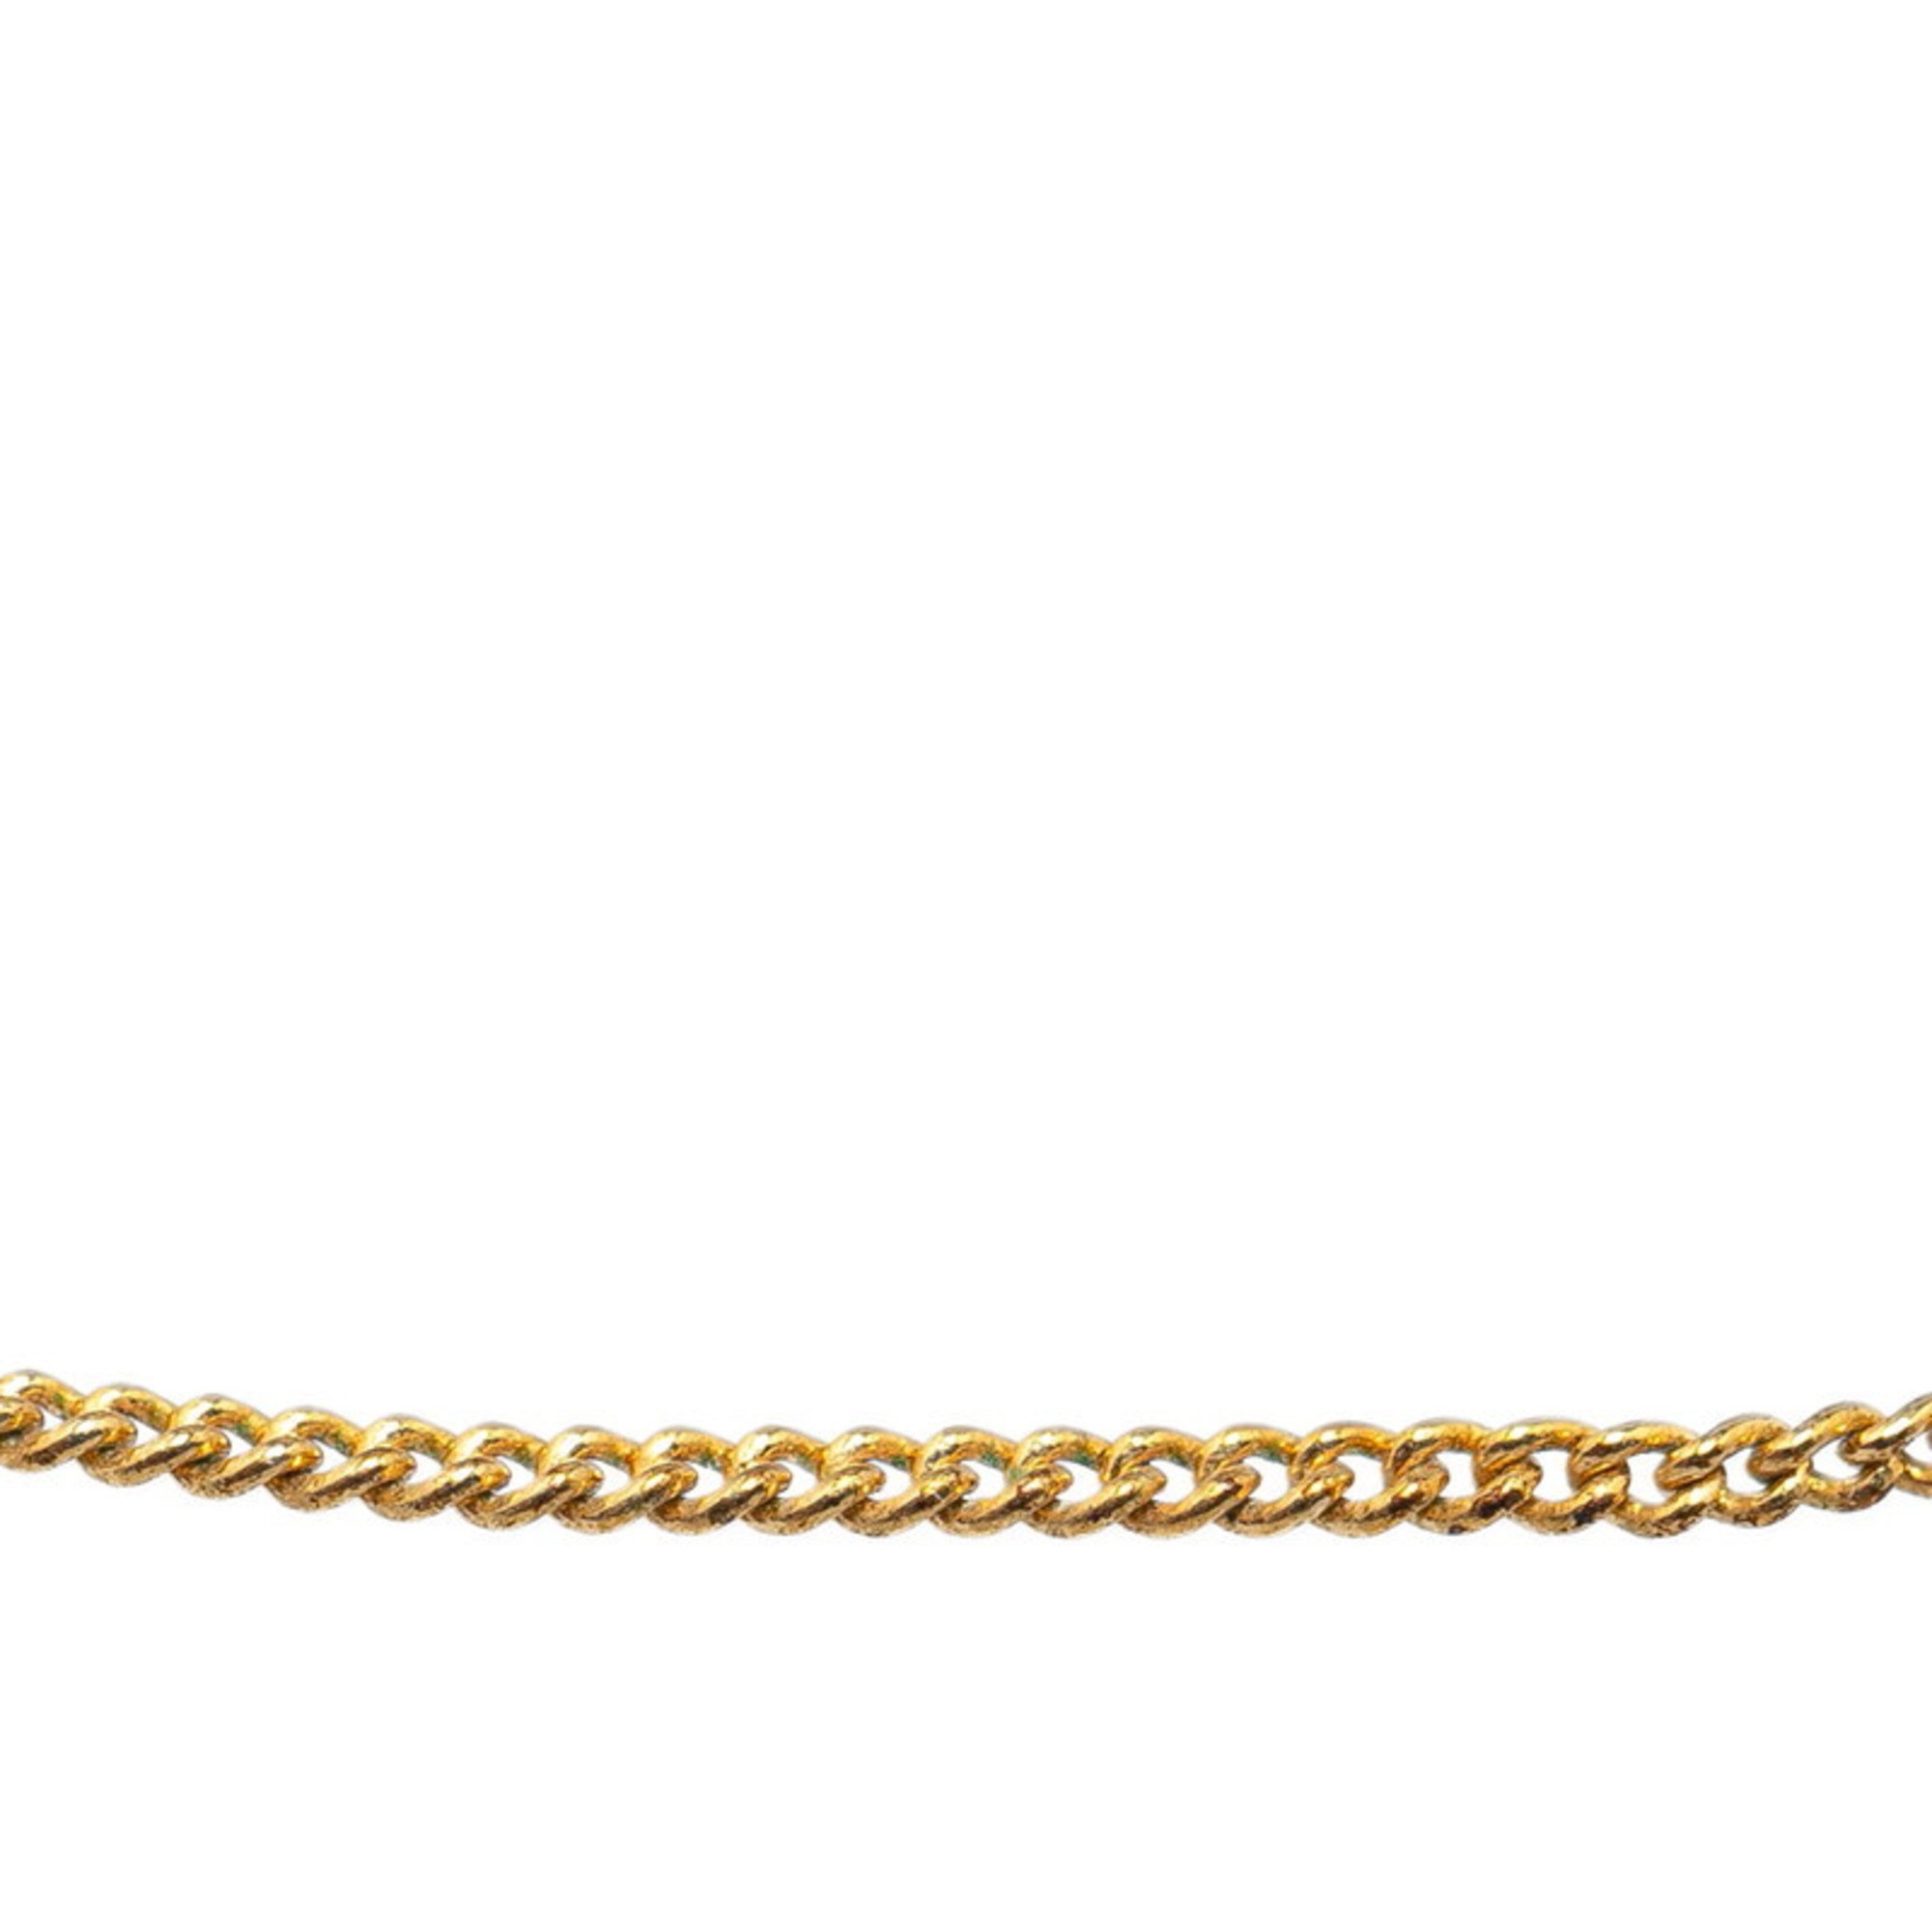 Christian Dior Dior necklace gold plated for women